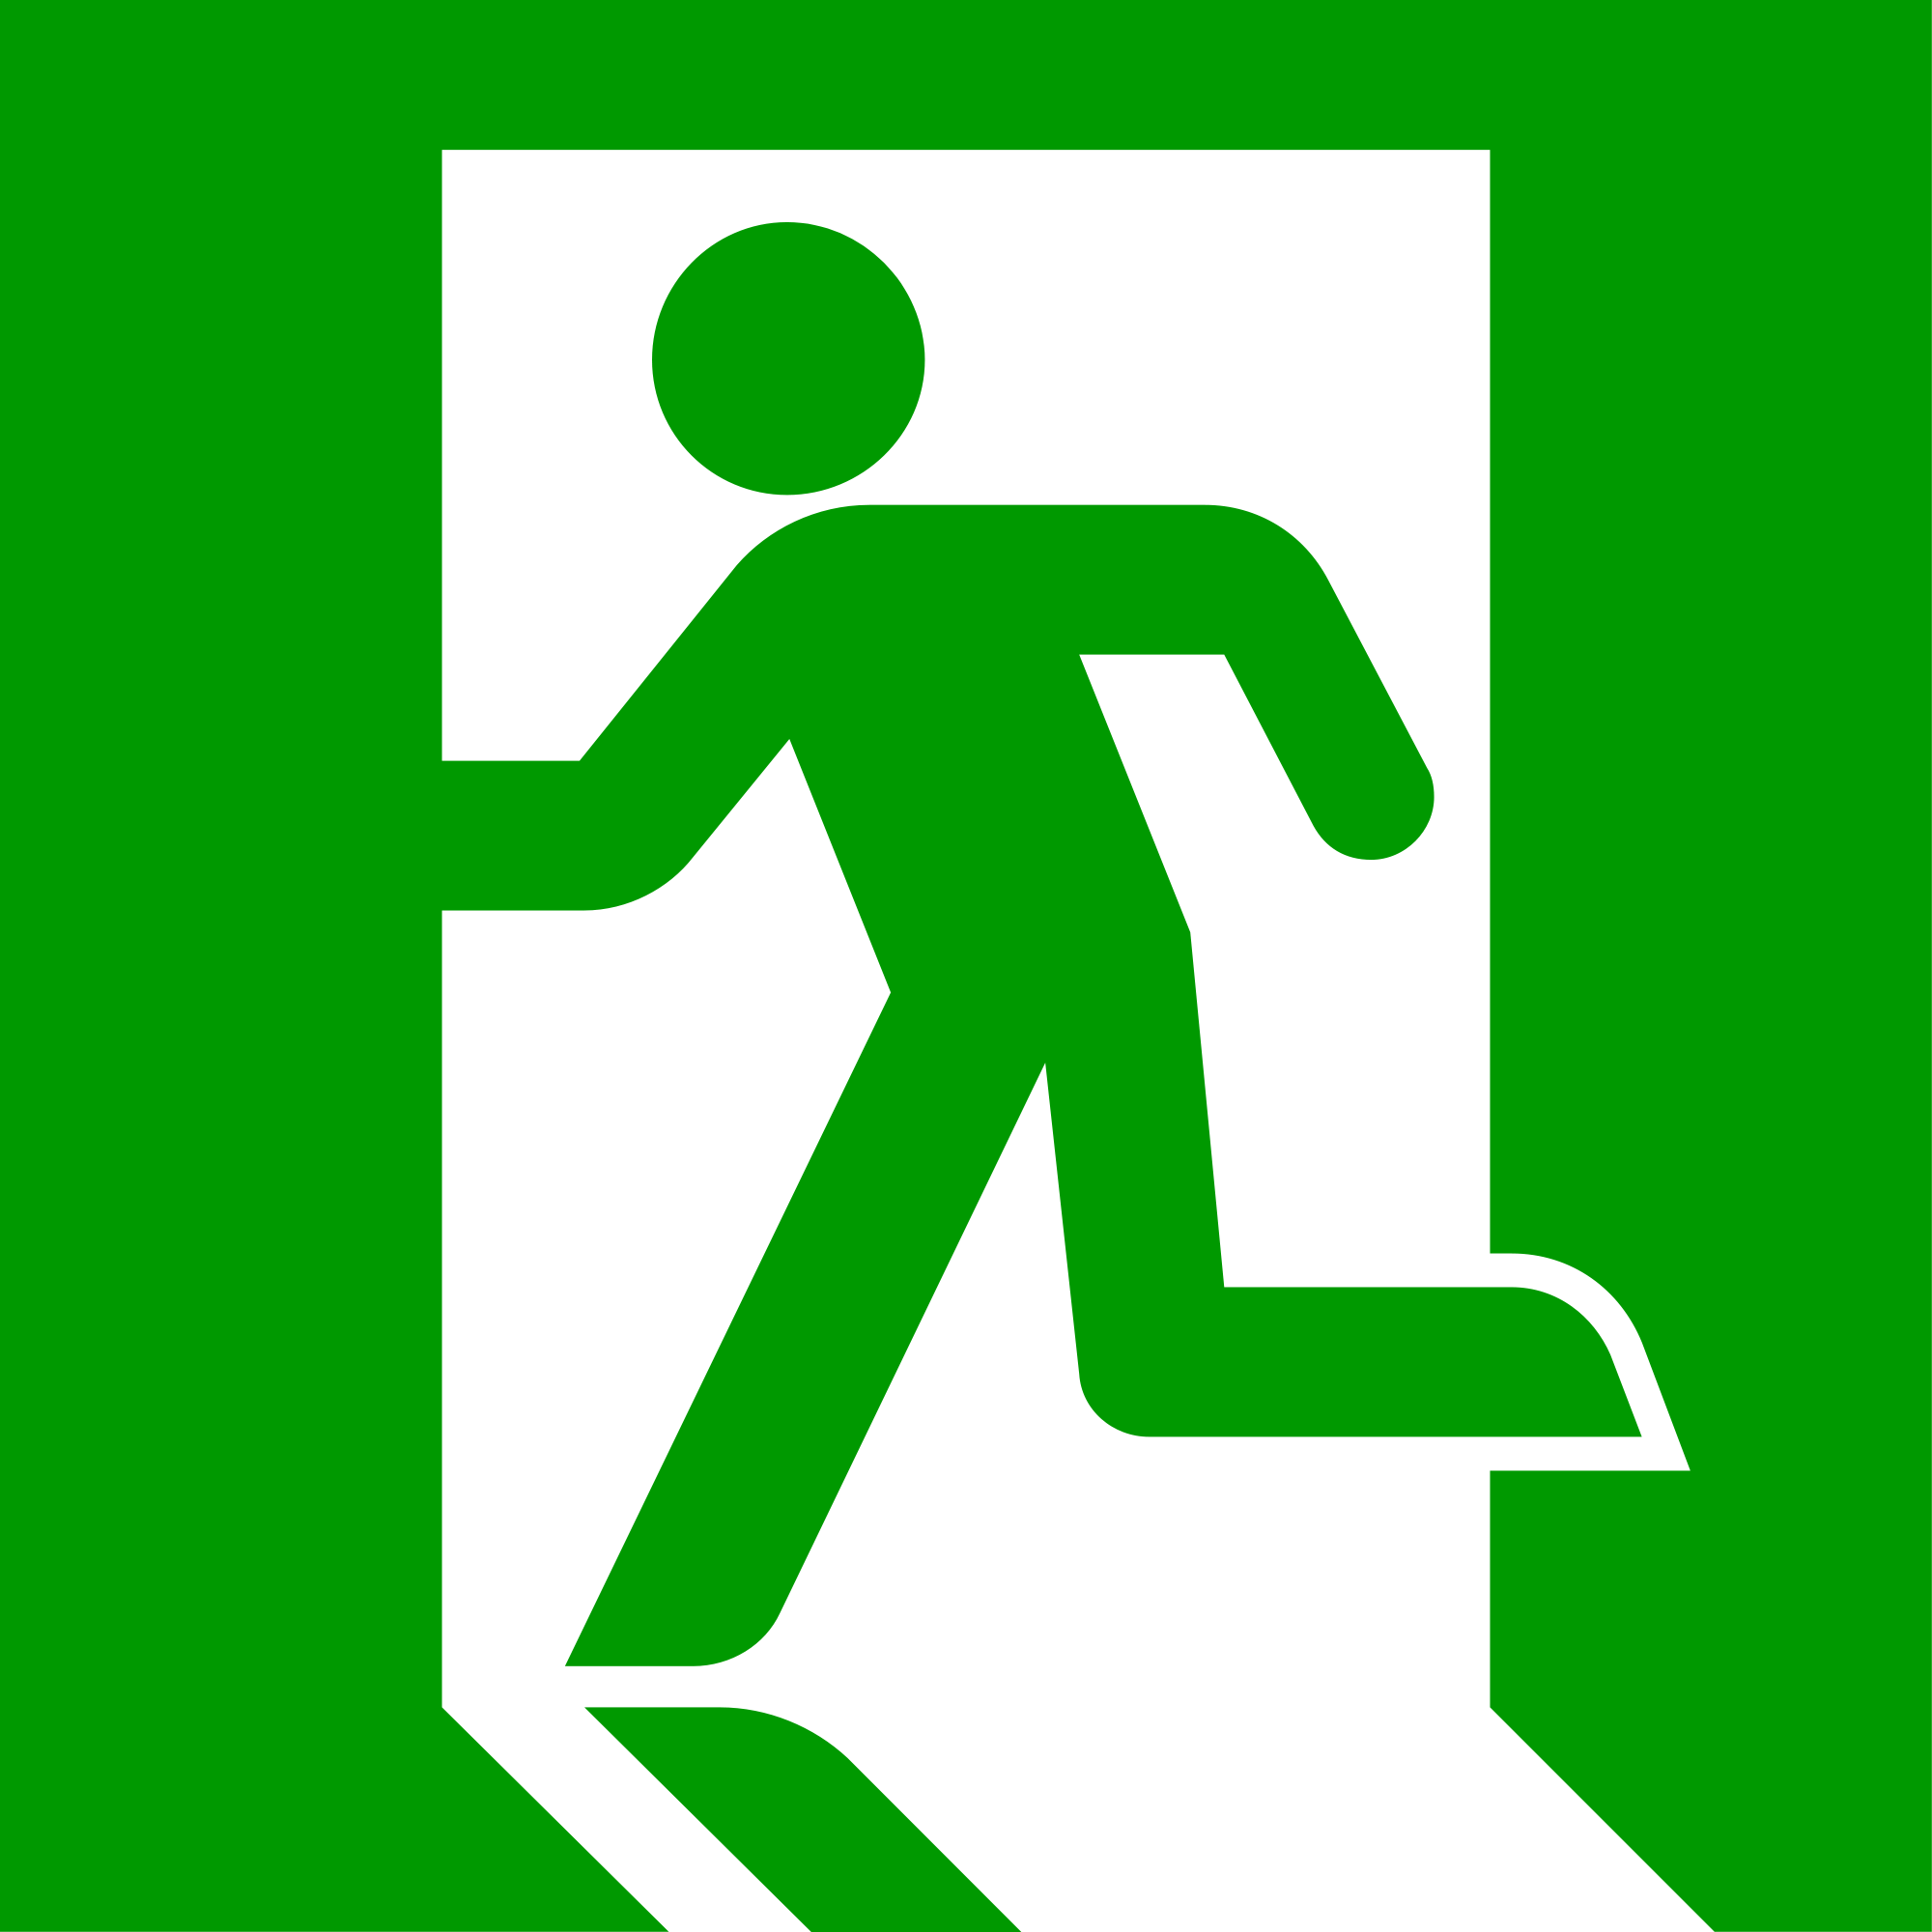 Exit sign - Wikipedia, the free encyclopedia